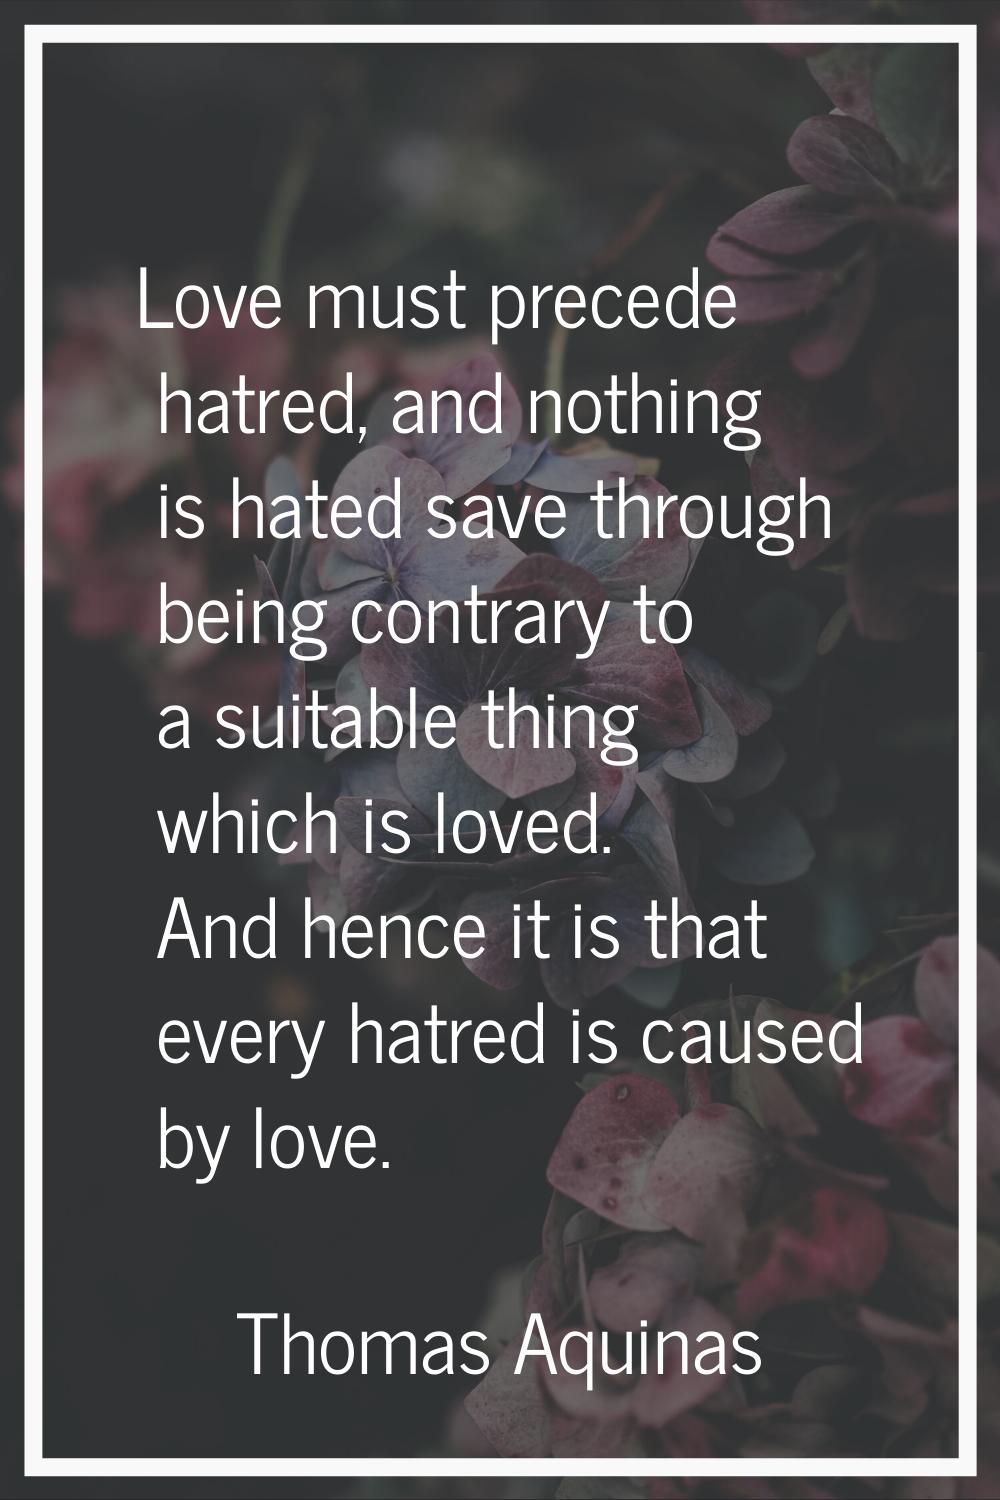 Love must precede hatred, and nothing is hated save through being contrary to a suitable thing whic